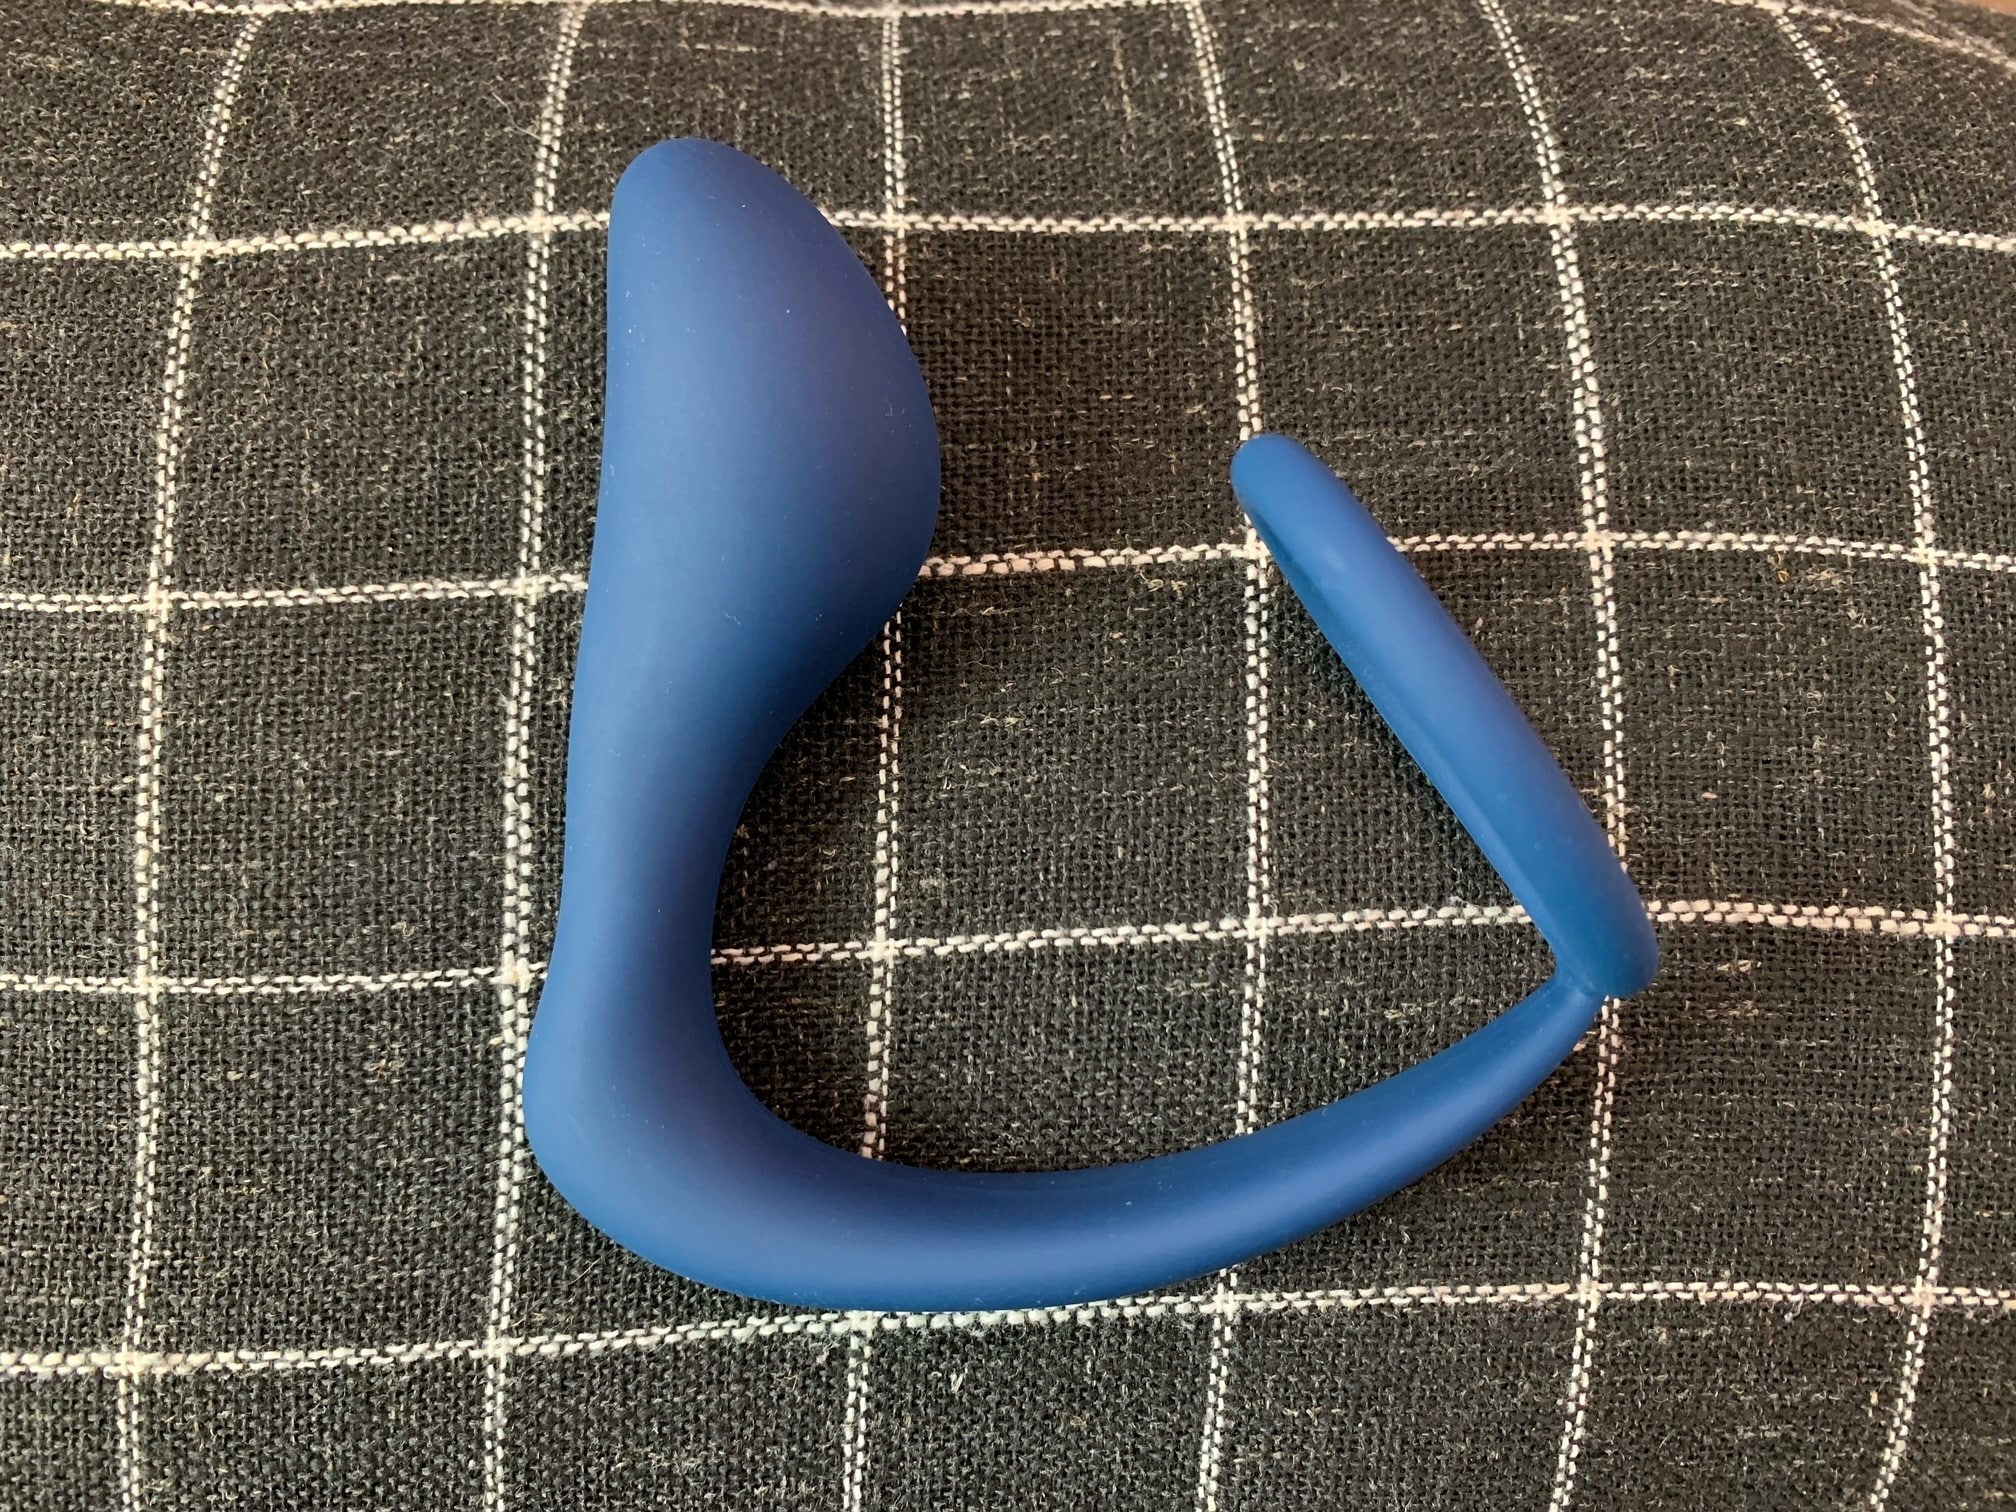 Lynk Plugged Cock Ring Prostate Massager. Slide 3